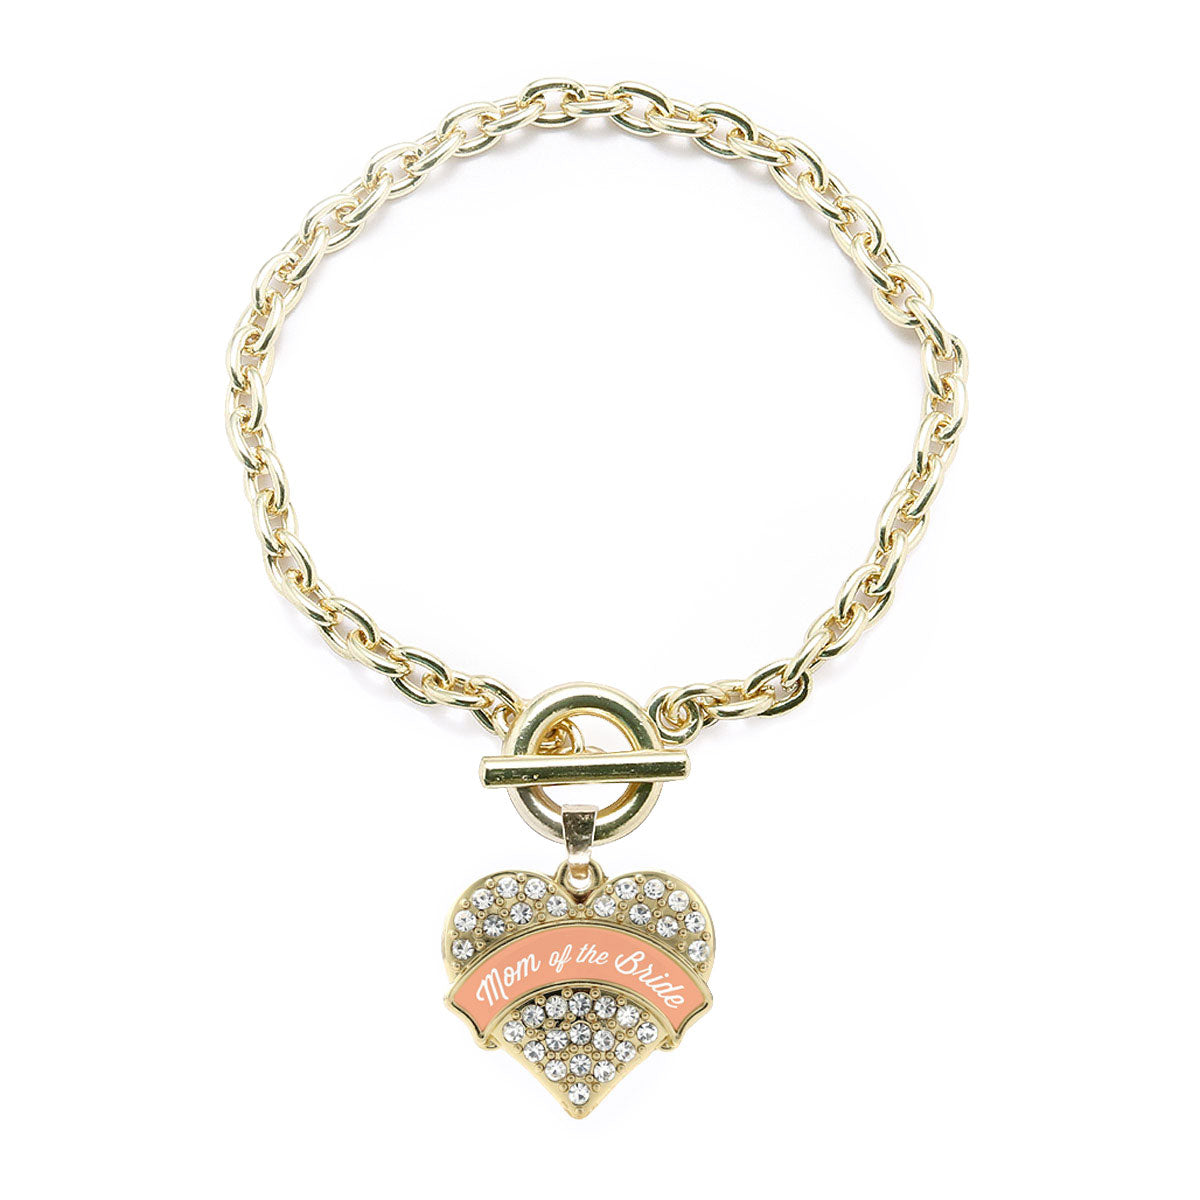 Gold Peach Mom of the Bride Pave Heart Charm Toggle Bracelet